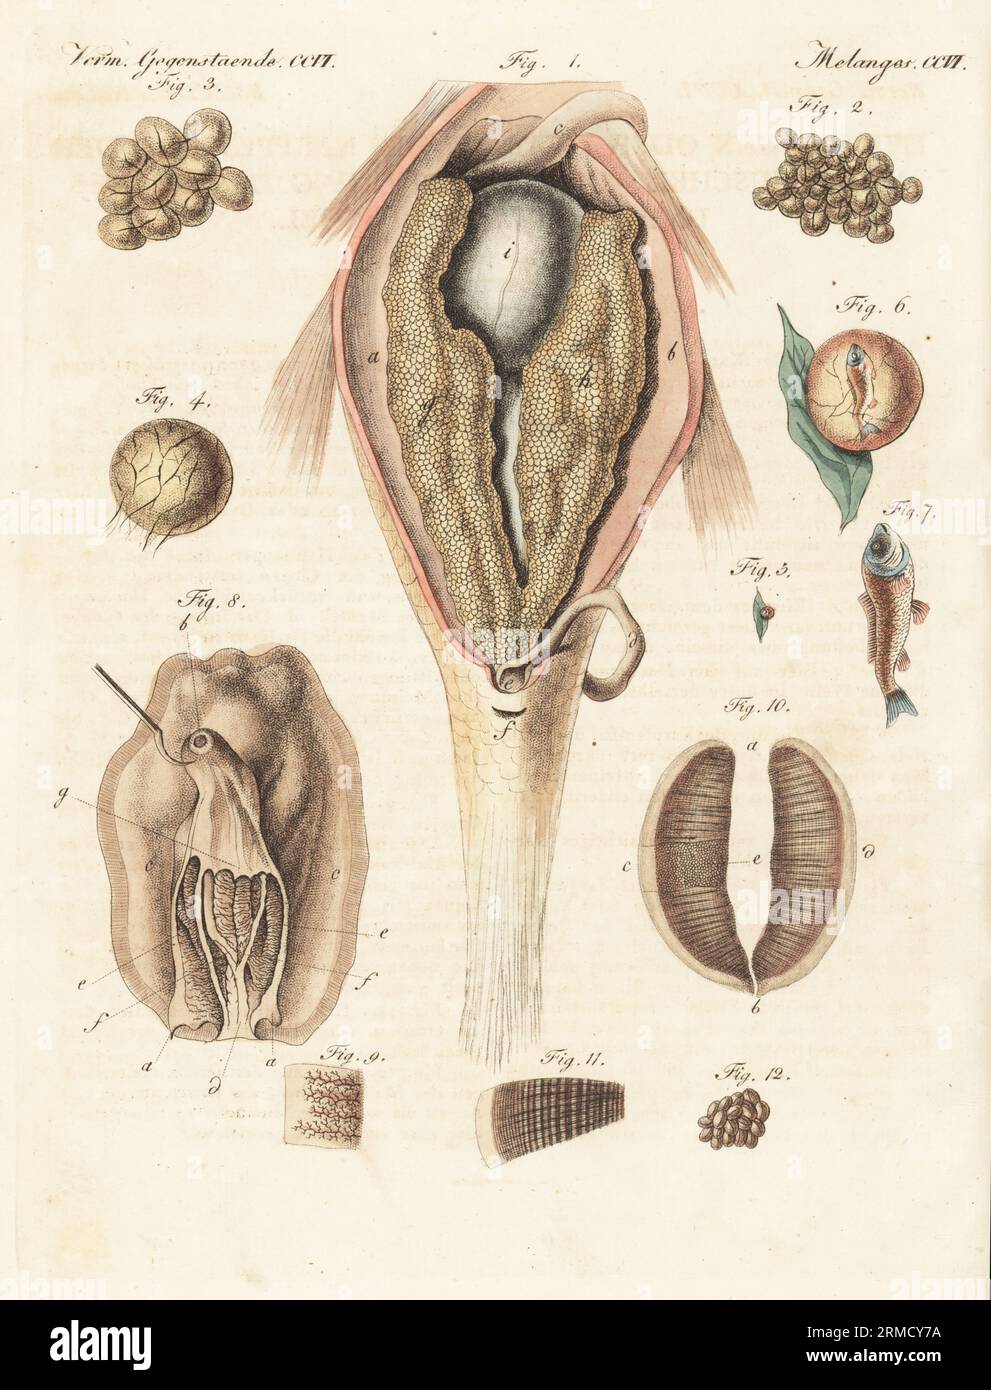 Anatomy of the generation of the common carp, Cyprinus carpio, and brown mussel, Perna perna. Carp sliced open to reveal ovaries 1, carp roe 2-6, young carp 7, mussel 8, mussel ovaries 9-11, and glochidia (mussel eggs) 12. Handcoloured copperplate engraving from Carl Bertuch's Bilderbuch fur Kinder (Picture Book for Children), Weimar, 1815. A 12-volume encyclopedia for children illustrated with almost 1,200 engraved plates on natural history, science, costume, mythology, etc., published from 1790-1830. Stock Photo